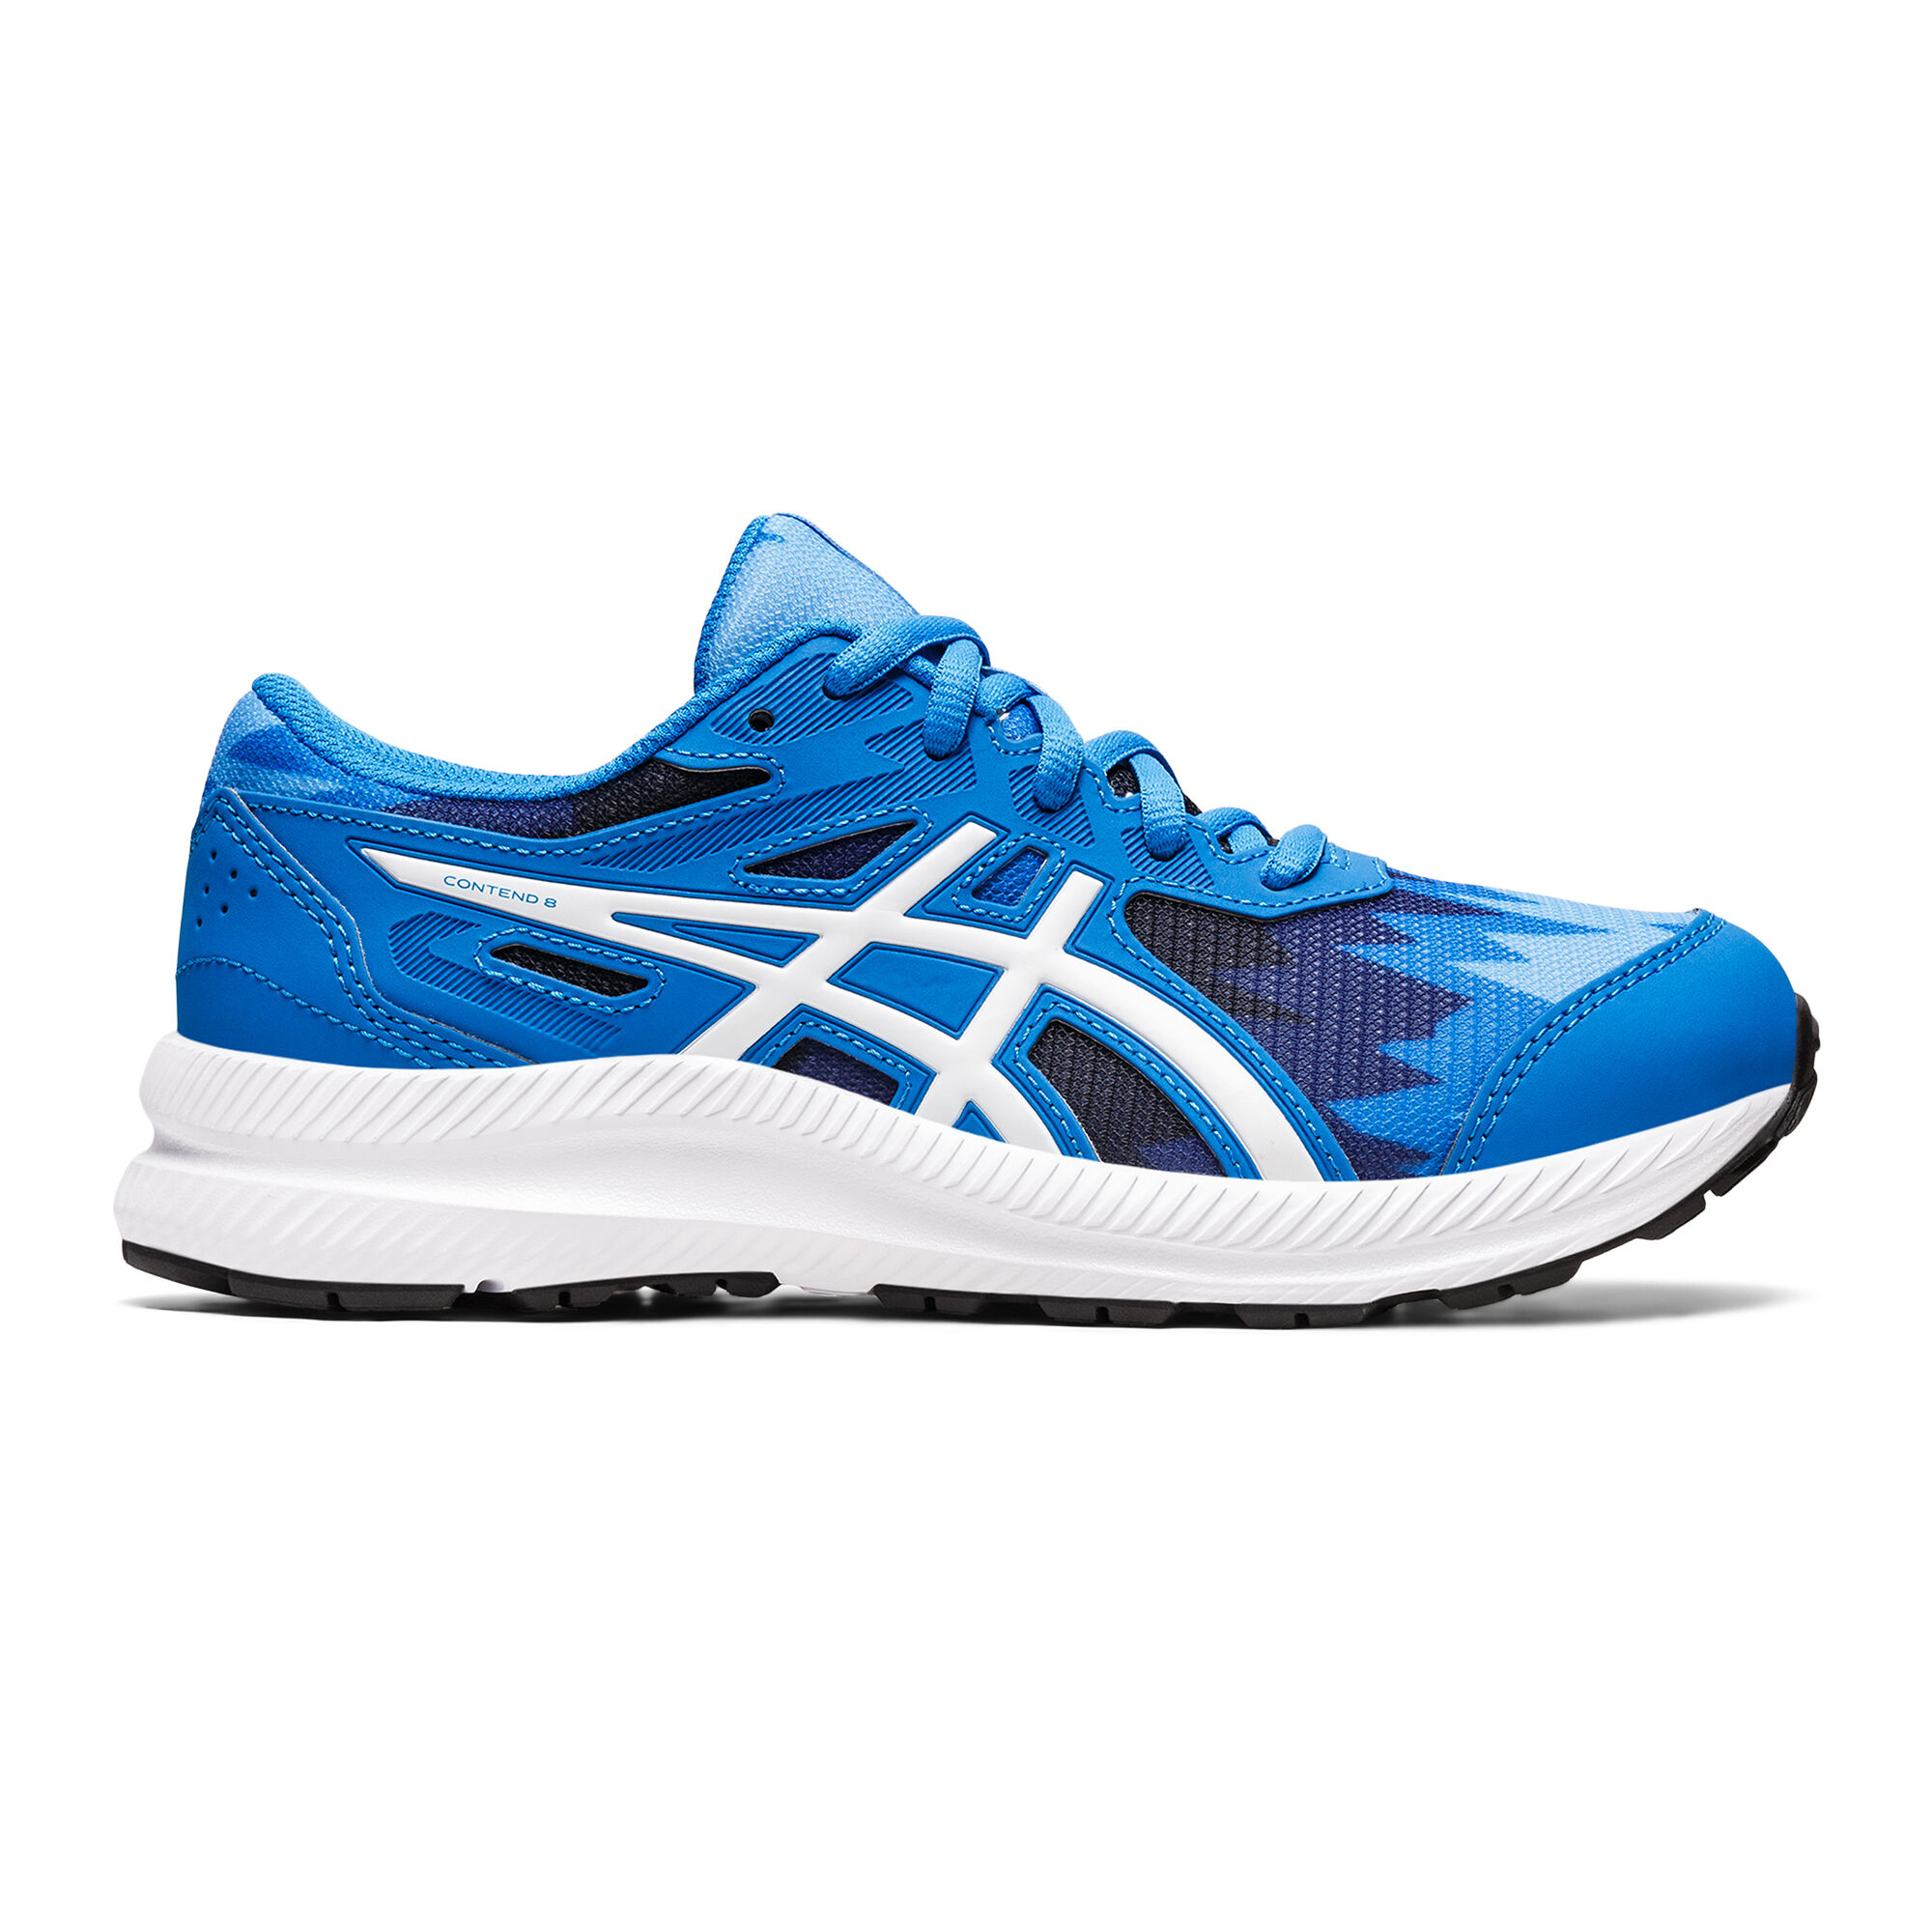 Asics Kids' CONTEND 8 Grade School Running Shoes  - Electric Blue/White - Size: 1.5